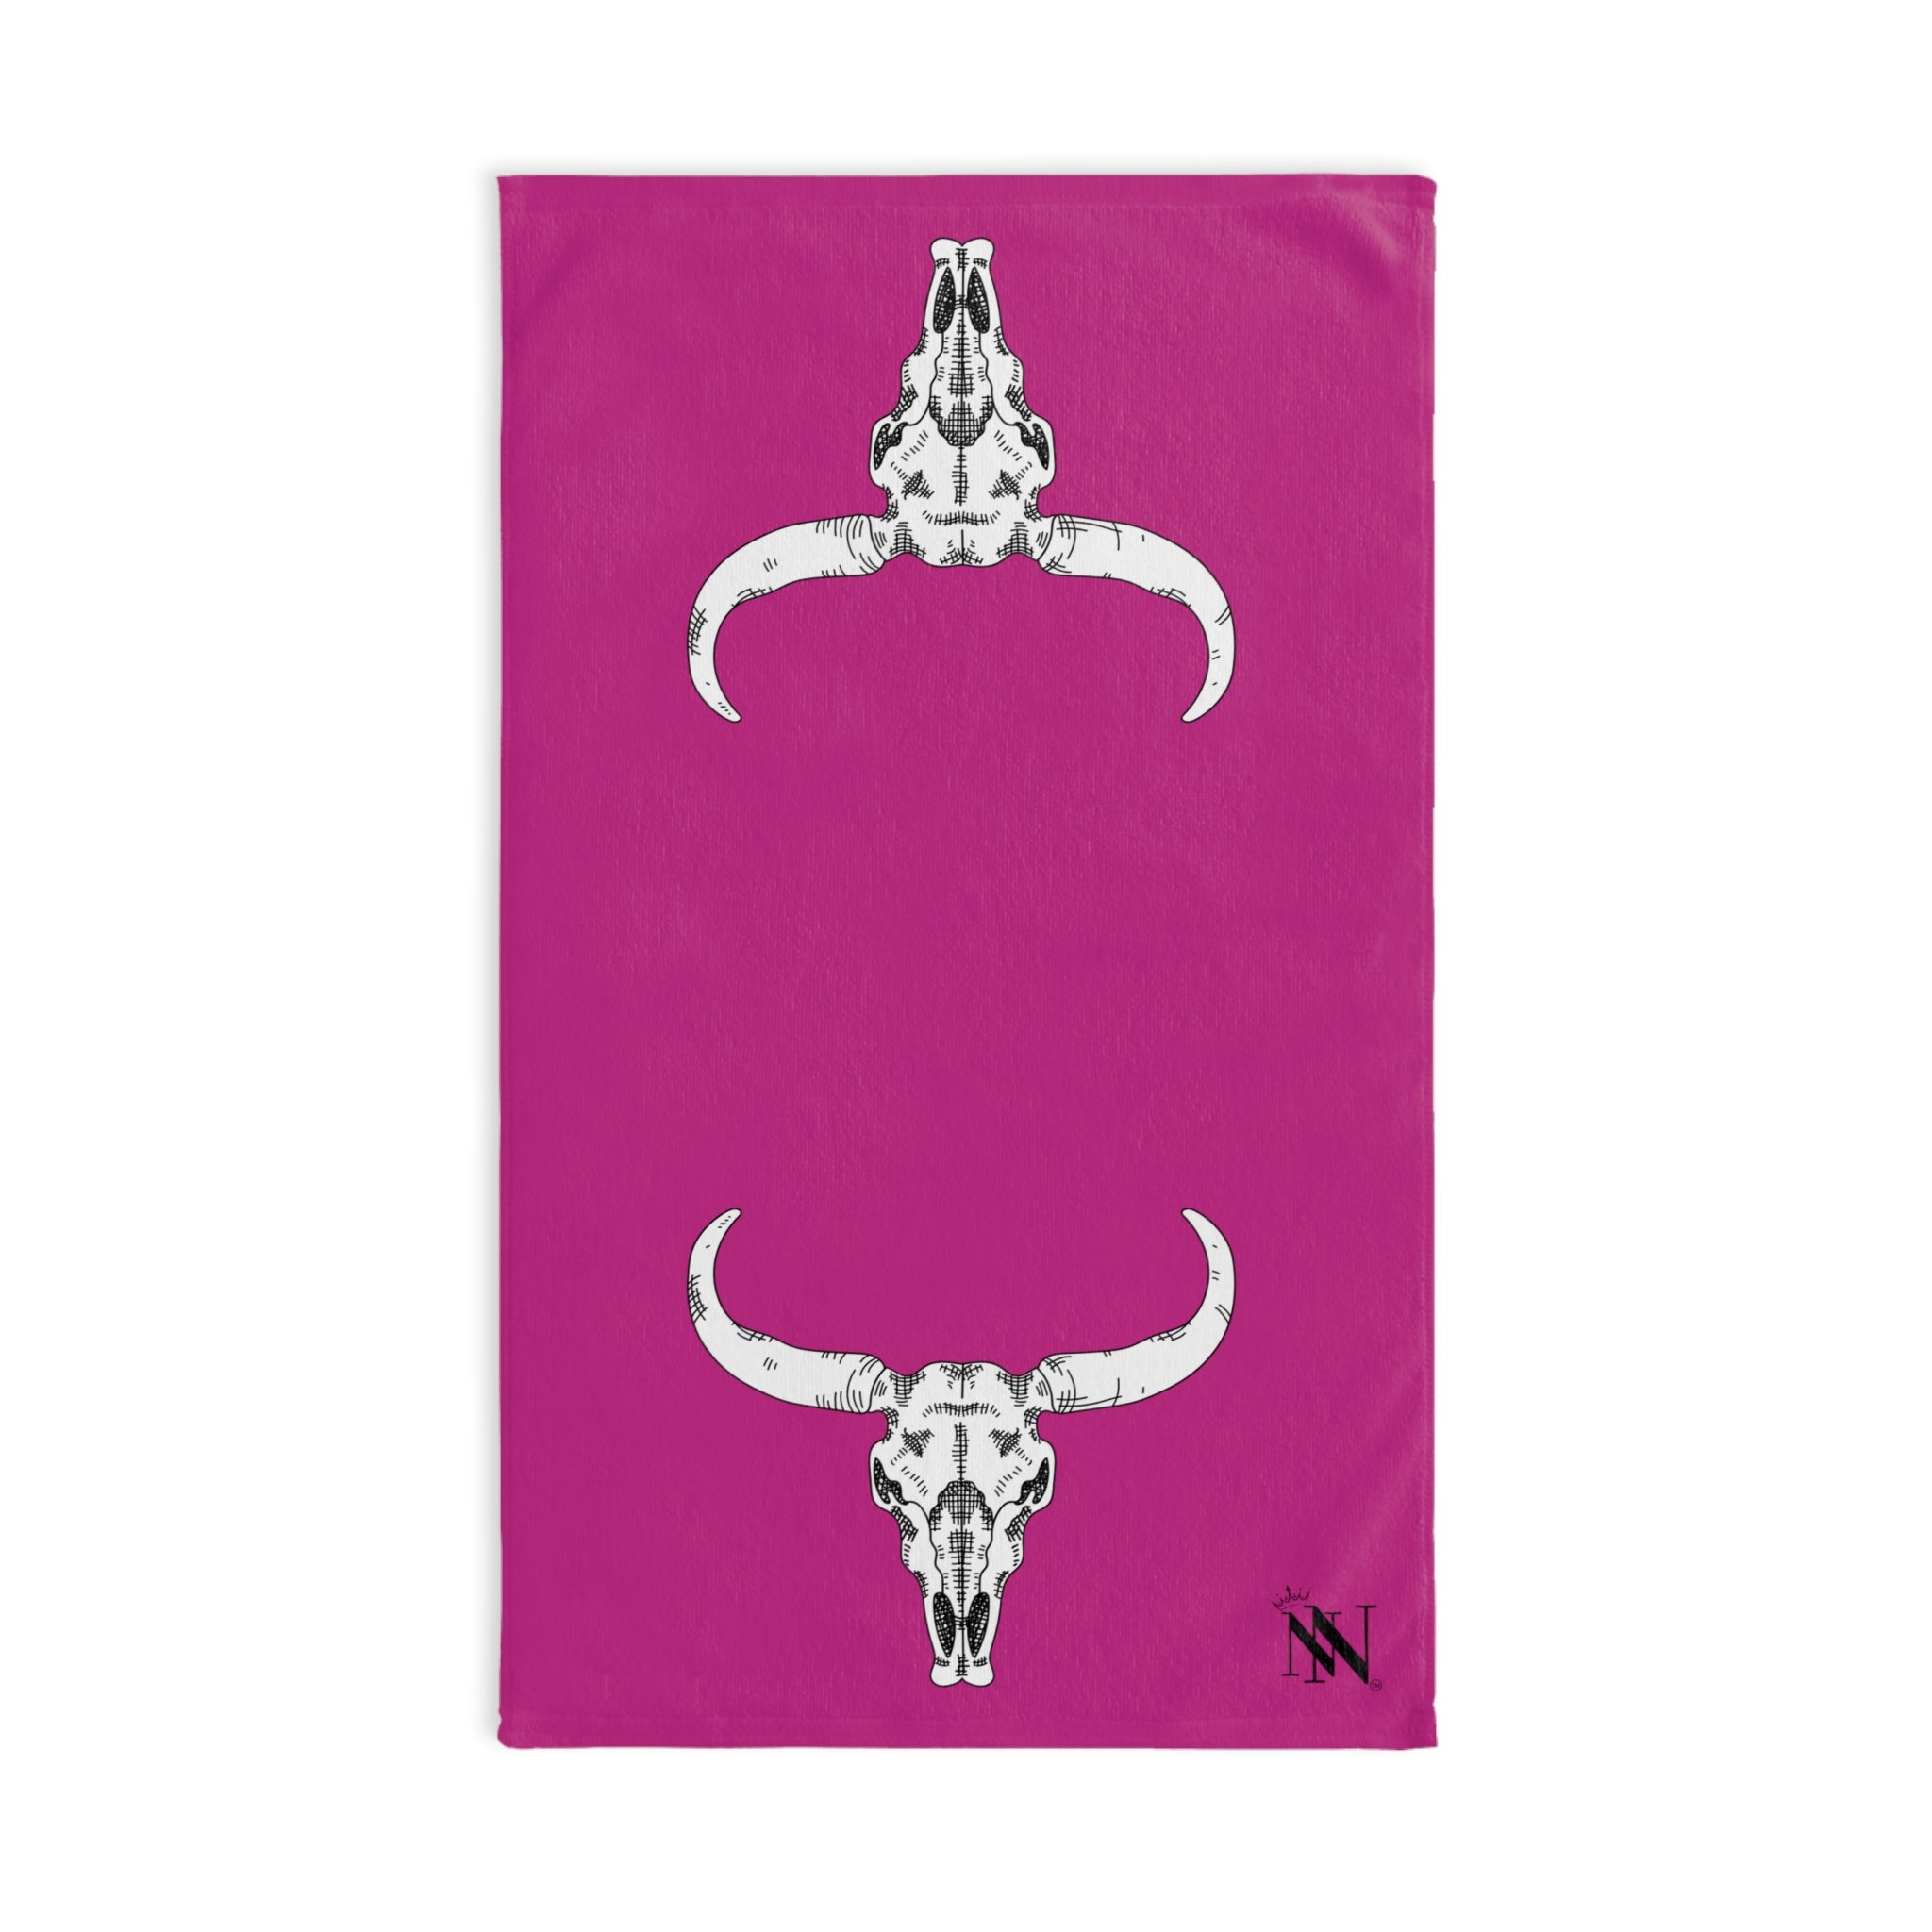 Black Mr Mrs Cow Skull Fuscia | Funny Gifts for Men - Gifts for Him - Birthday Gifts for Men, Him, Husband, Boyfriend, New Couple Gifts, Fathers & Valentines Day Gifts, Hand Towels NECTAR NAPKINS